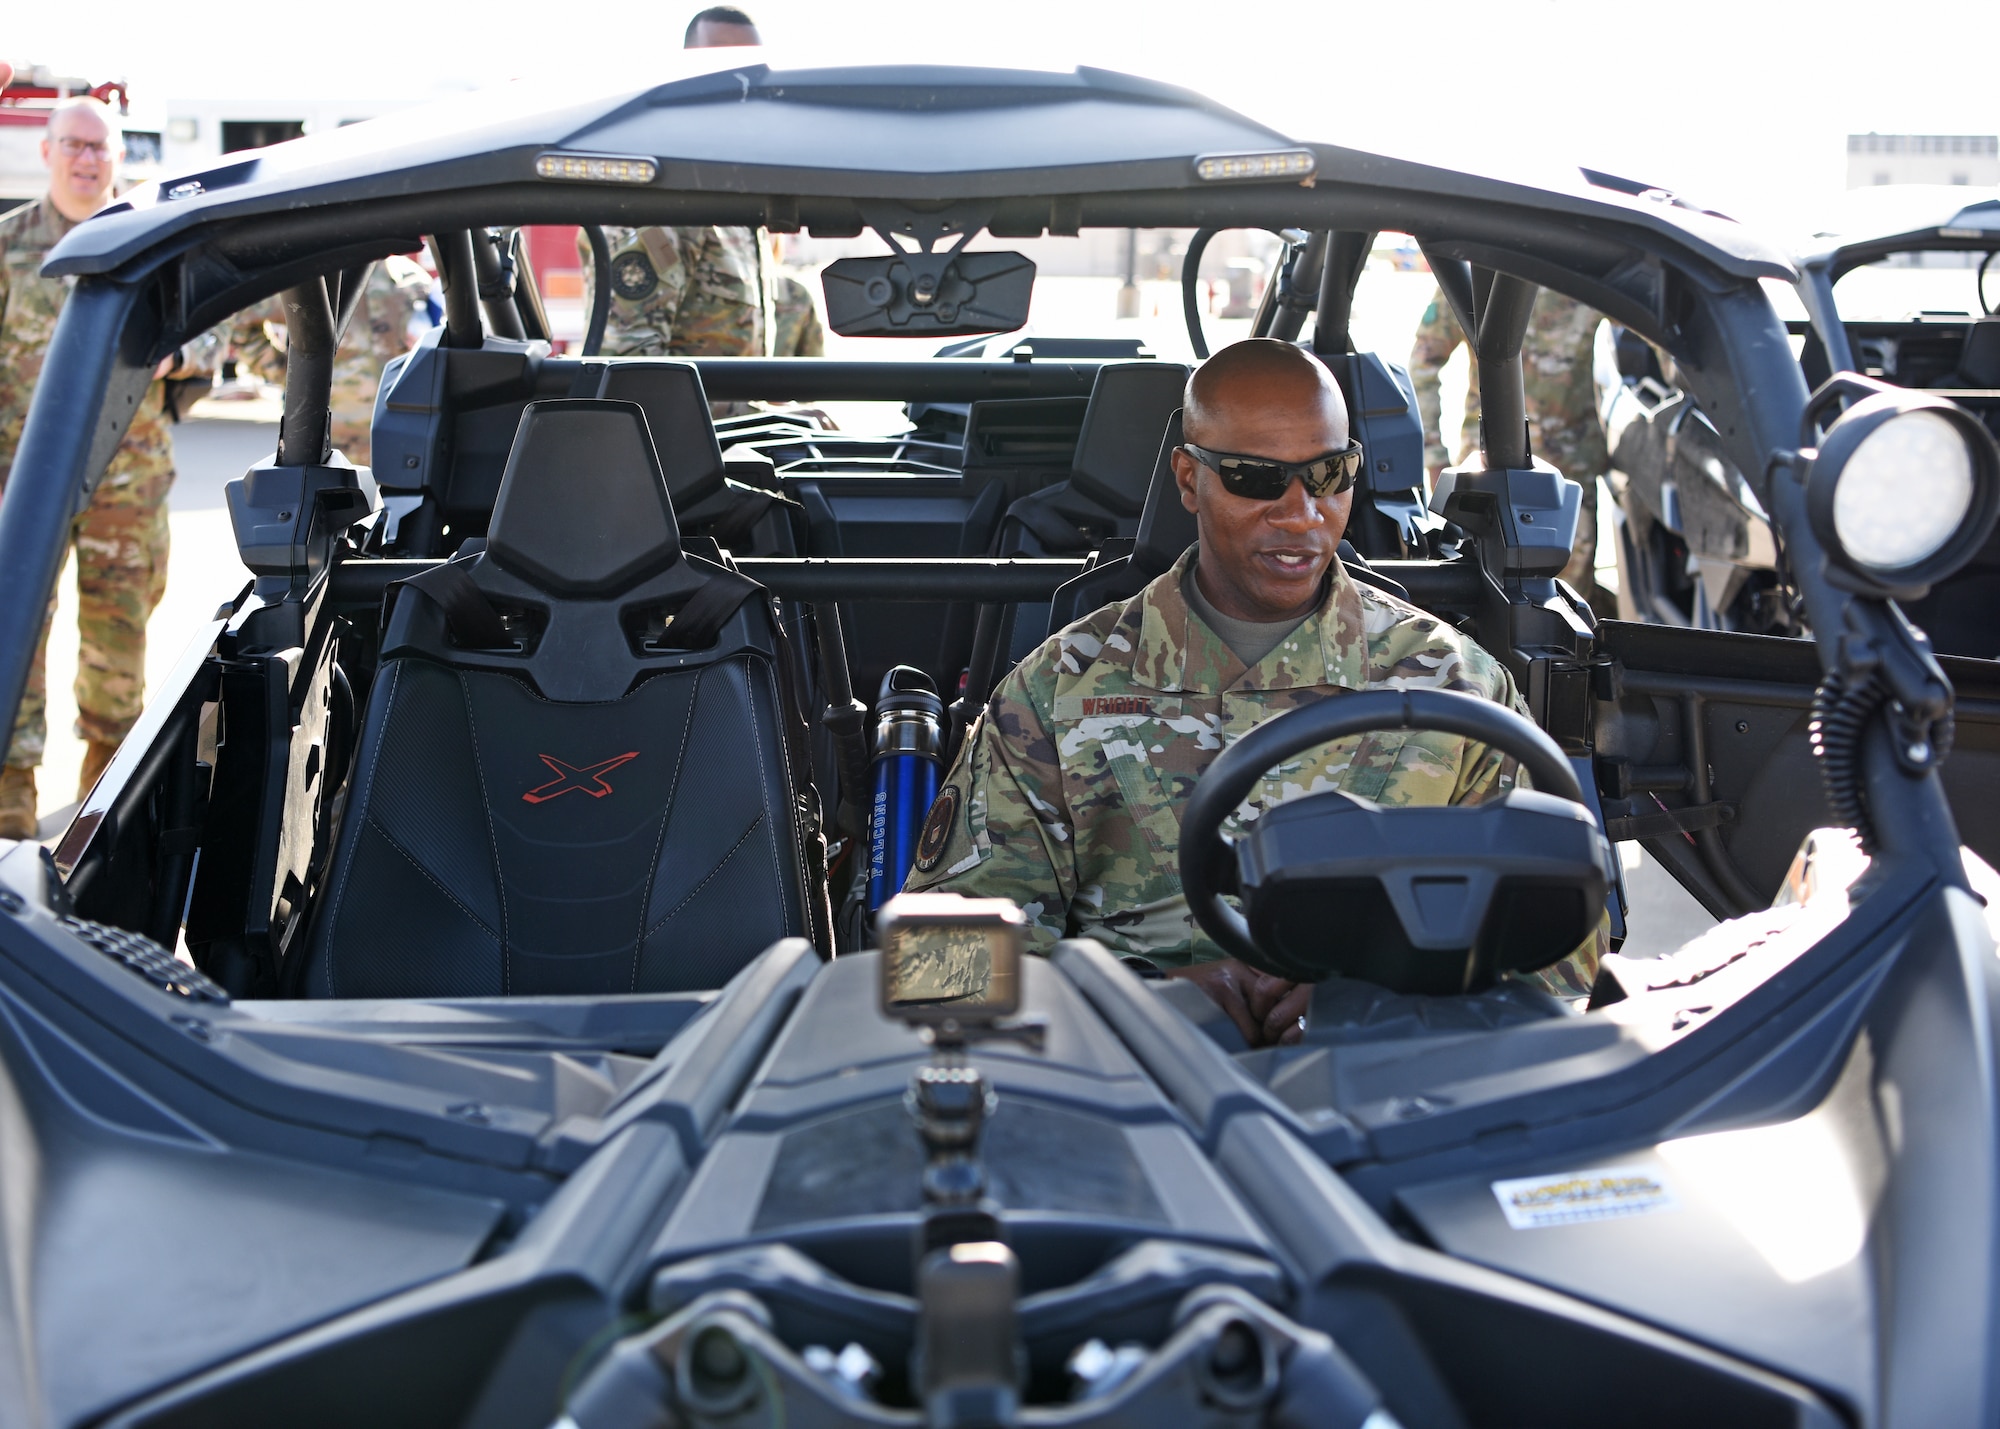 Chief Master Sergeant of the Air Force Kaleth O. Wright prepares to operate a utility task vehicle at Goodfellow Air Force Base, Texas, August 2, 2019. The UTV is used by the 17th Security Forces Squadron to patrol the wilderness of Goodfellow AFB that makes up 60% of the base. (U.S. Air Force photo by Airman 1st Class Ethan Sherwood/Released)